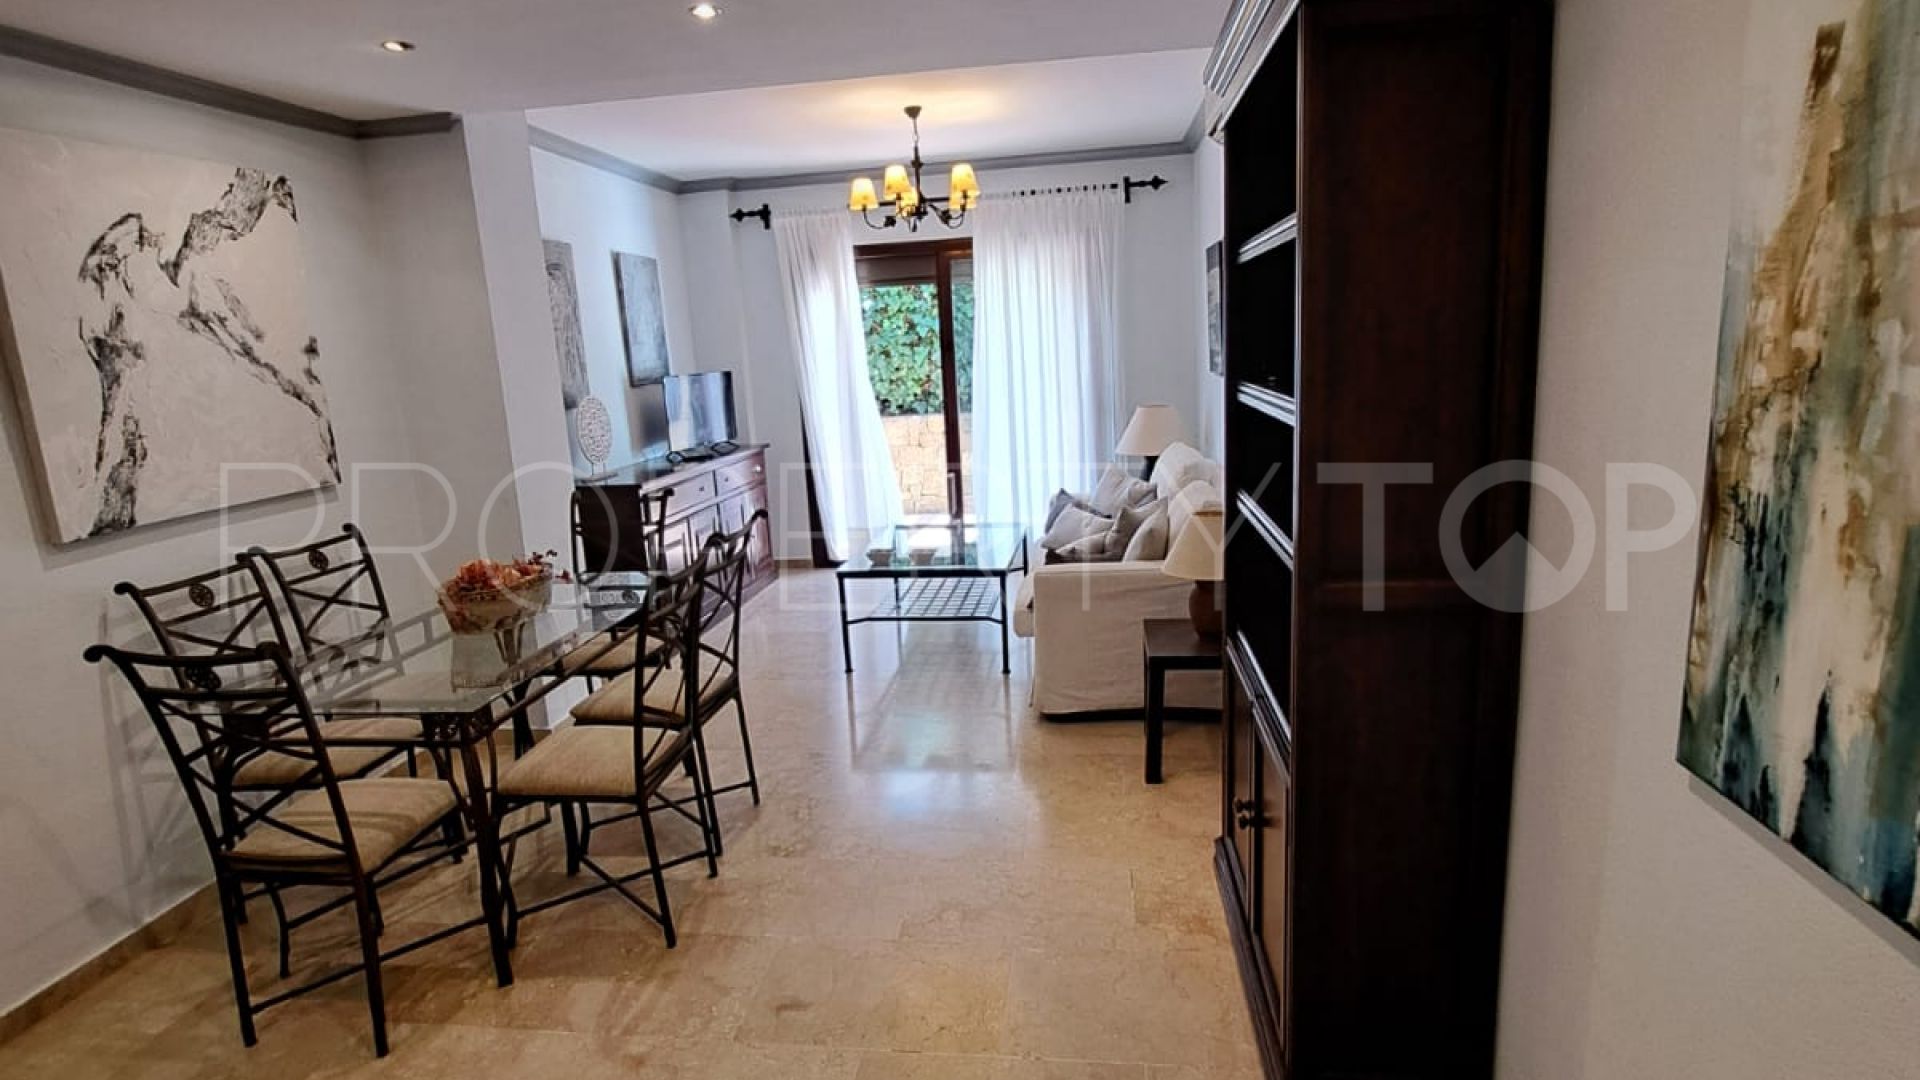 For sale apartment in Coto Real II with 2 bedrooms